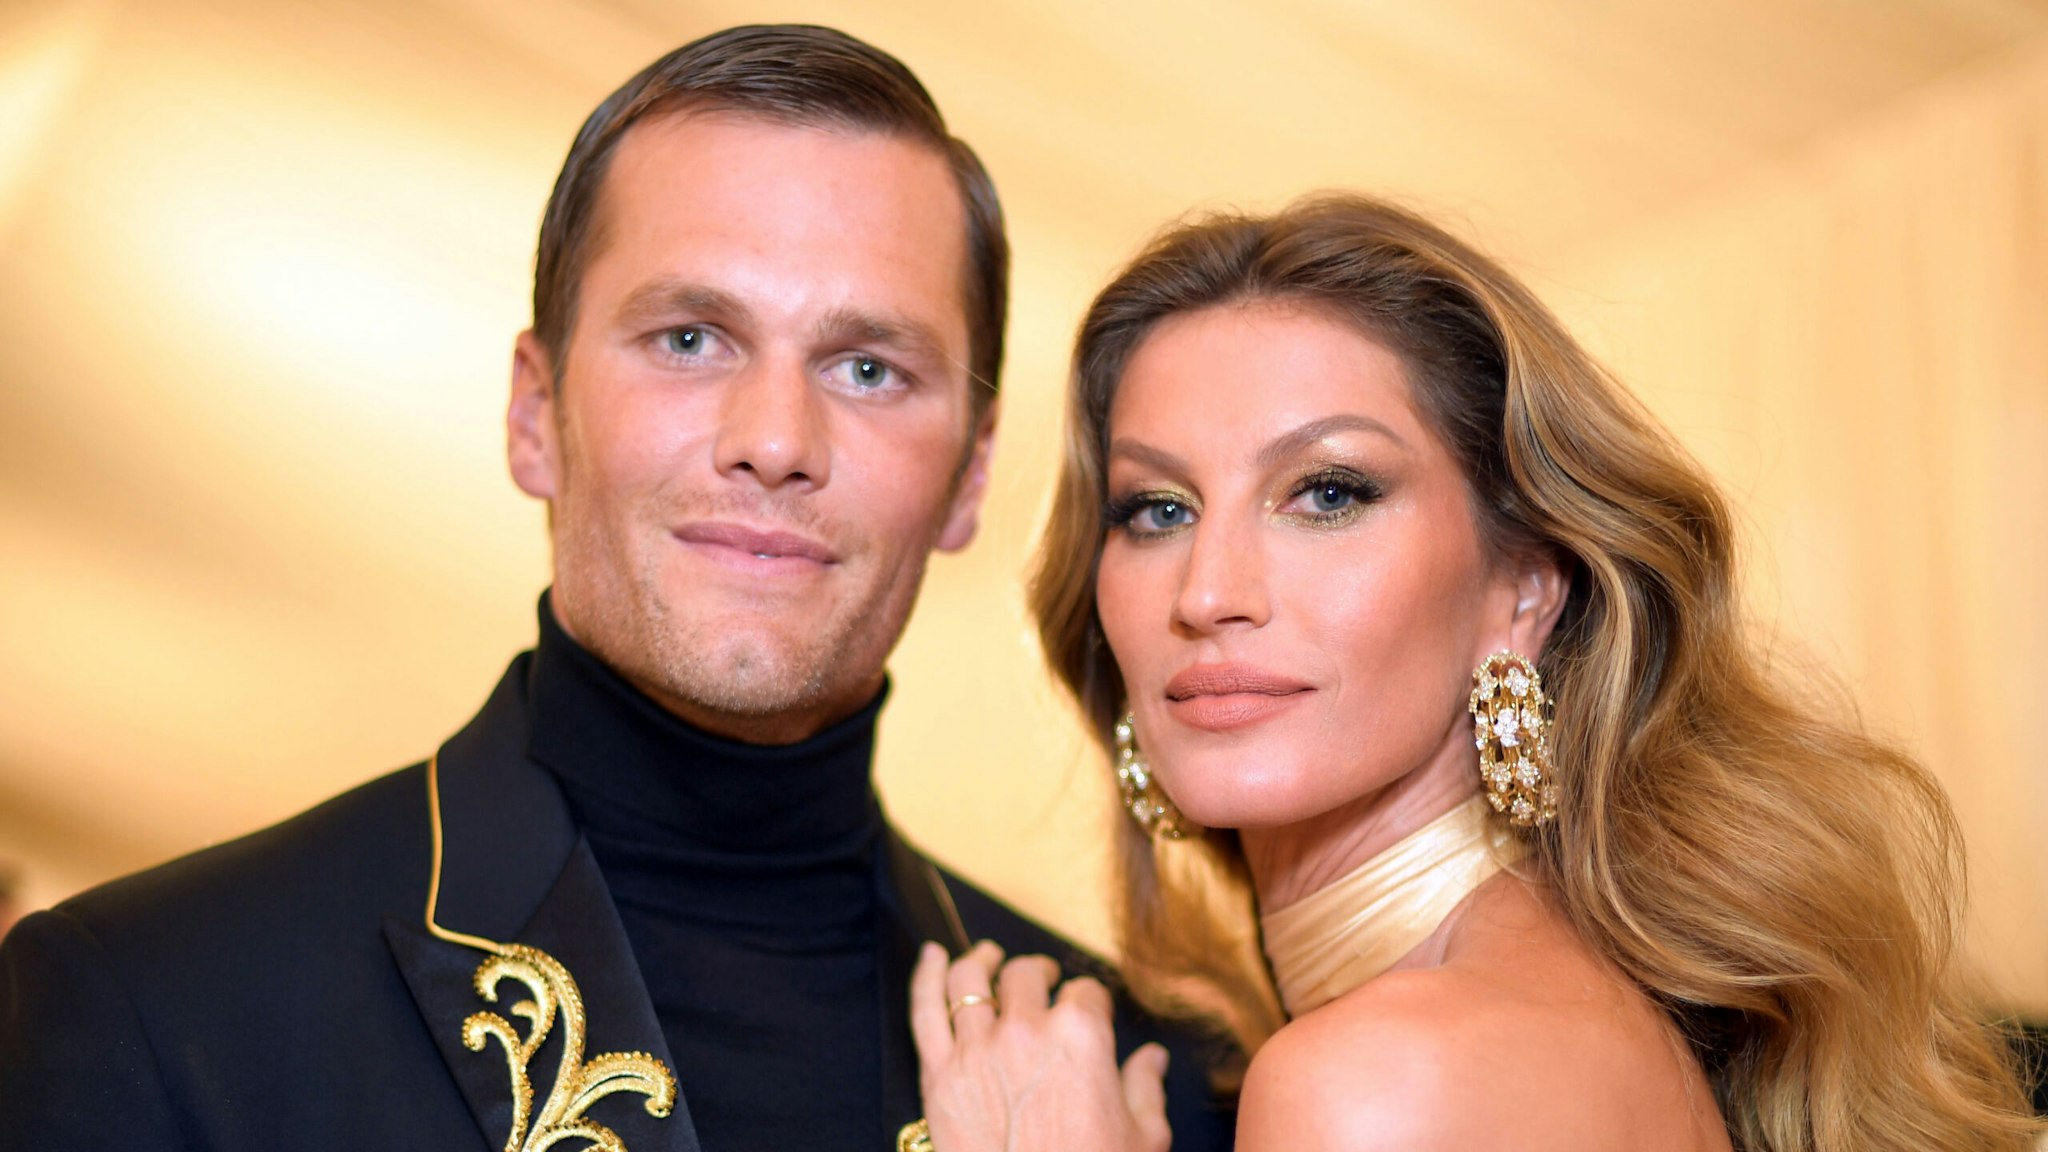 NEW YORK, NY - MAY 07: Tom Brady and Gisele Bundchen attend the Heavenly Bodies: Fashion &amp; The Catholic Imagination Costume Institute Gala at The Metropolitan Museum of Art on May 7, 2018 in New York City.